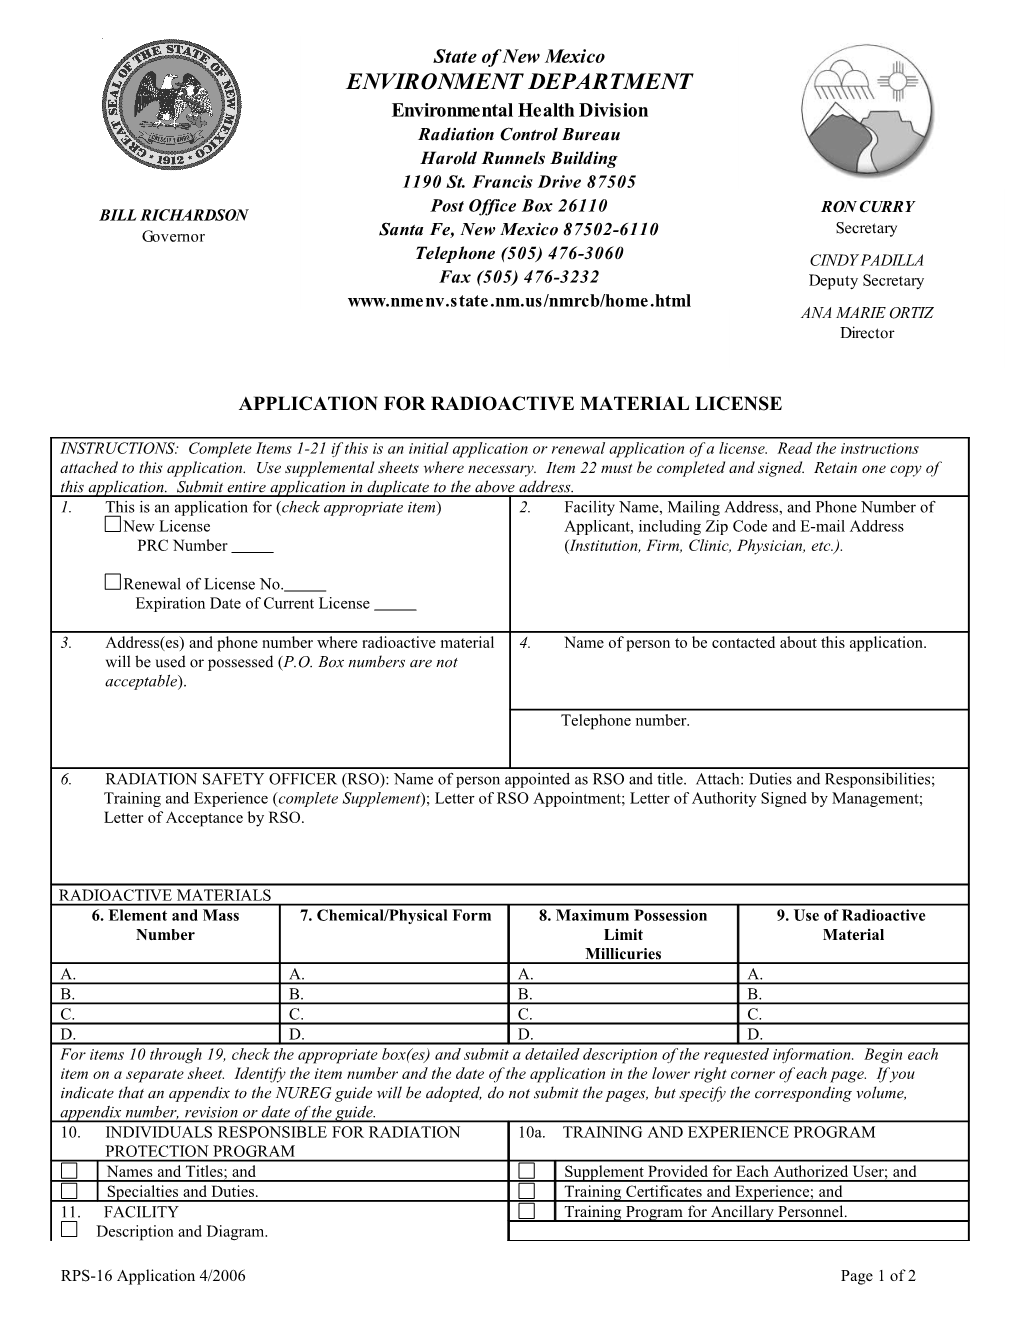 Application for Radioactive Material License